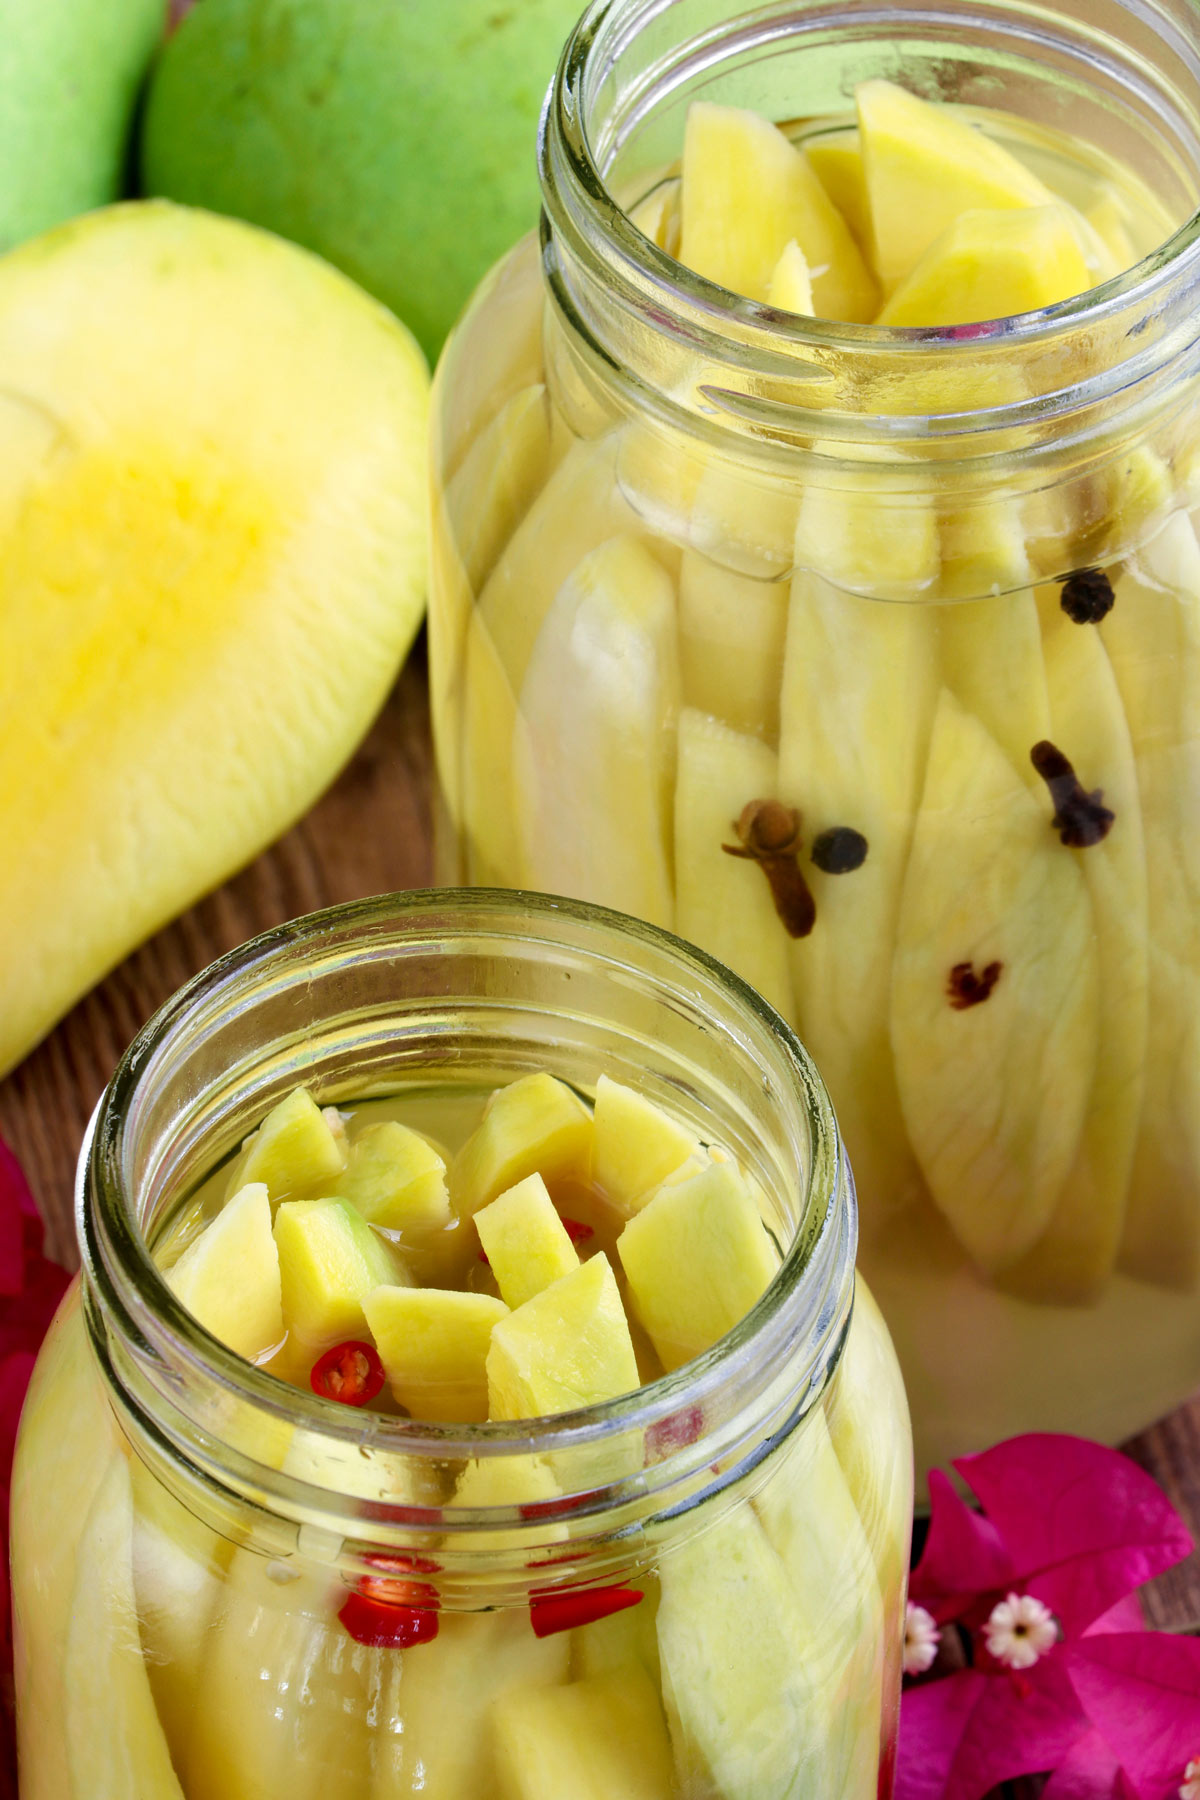 Pickled Mango made with almost ripe green mangoes, vinegar, sugar, salt, and water.